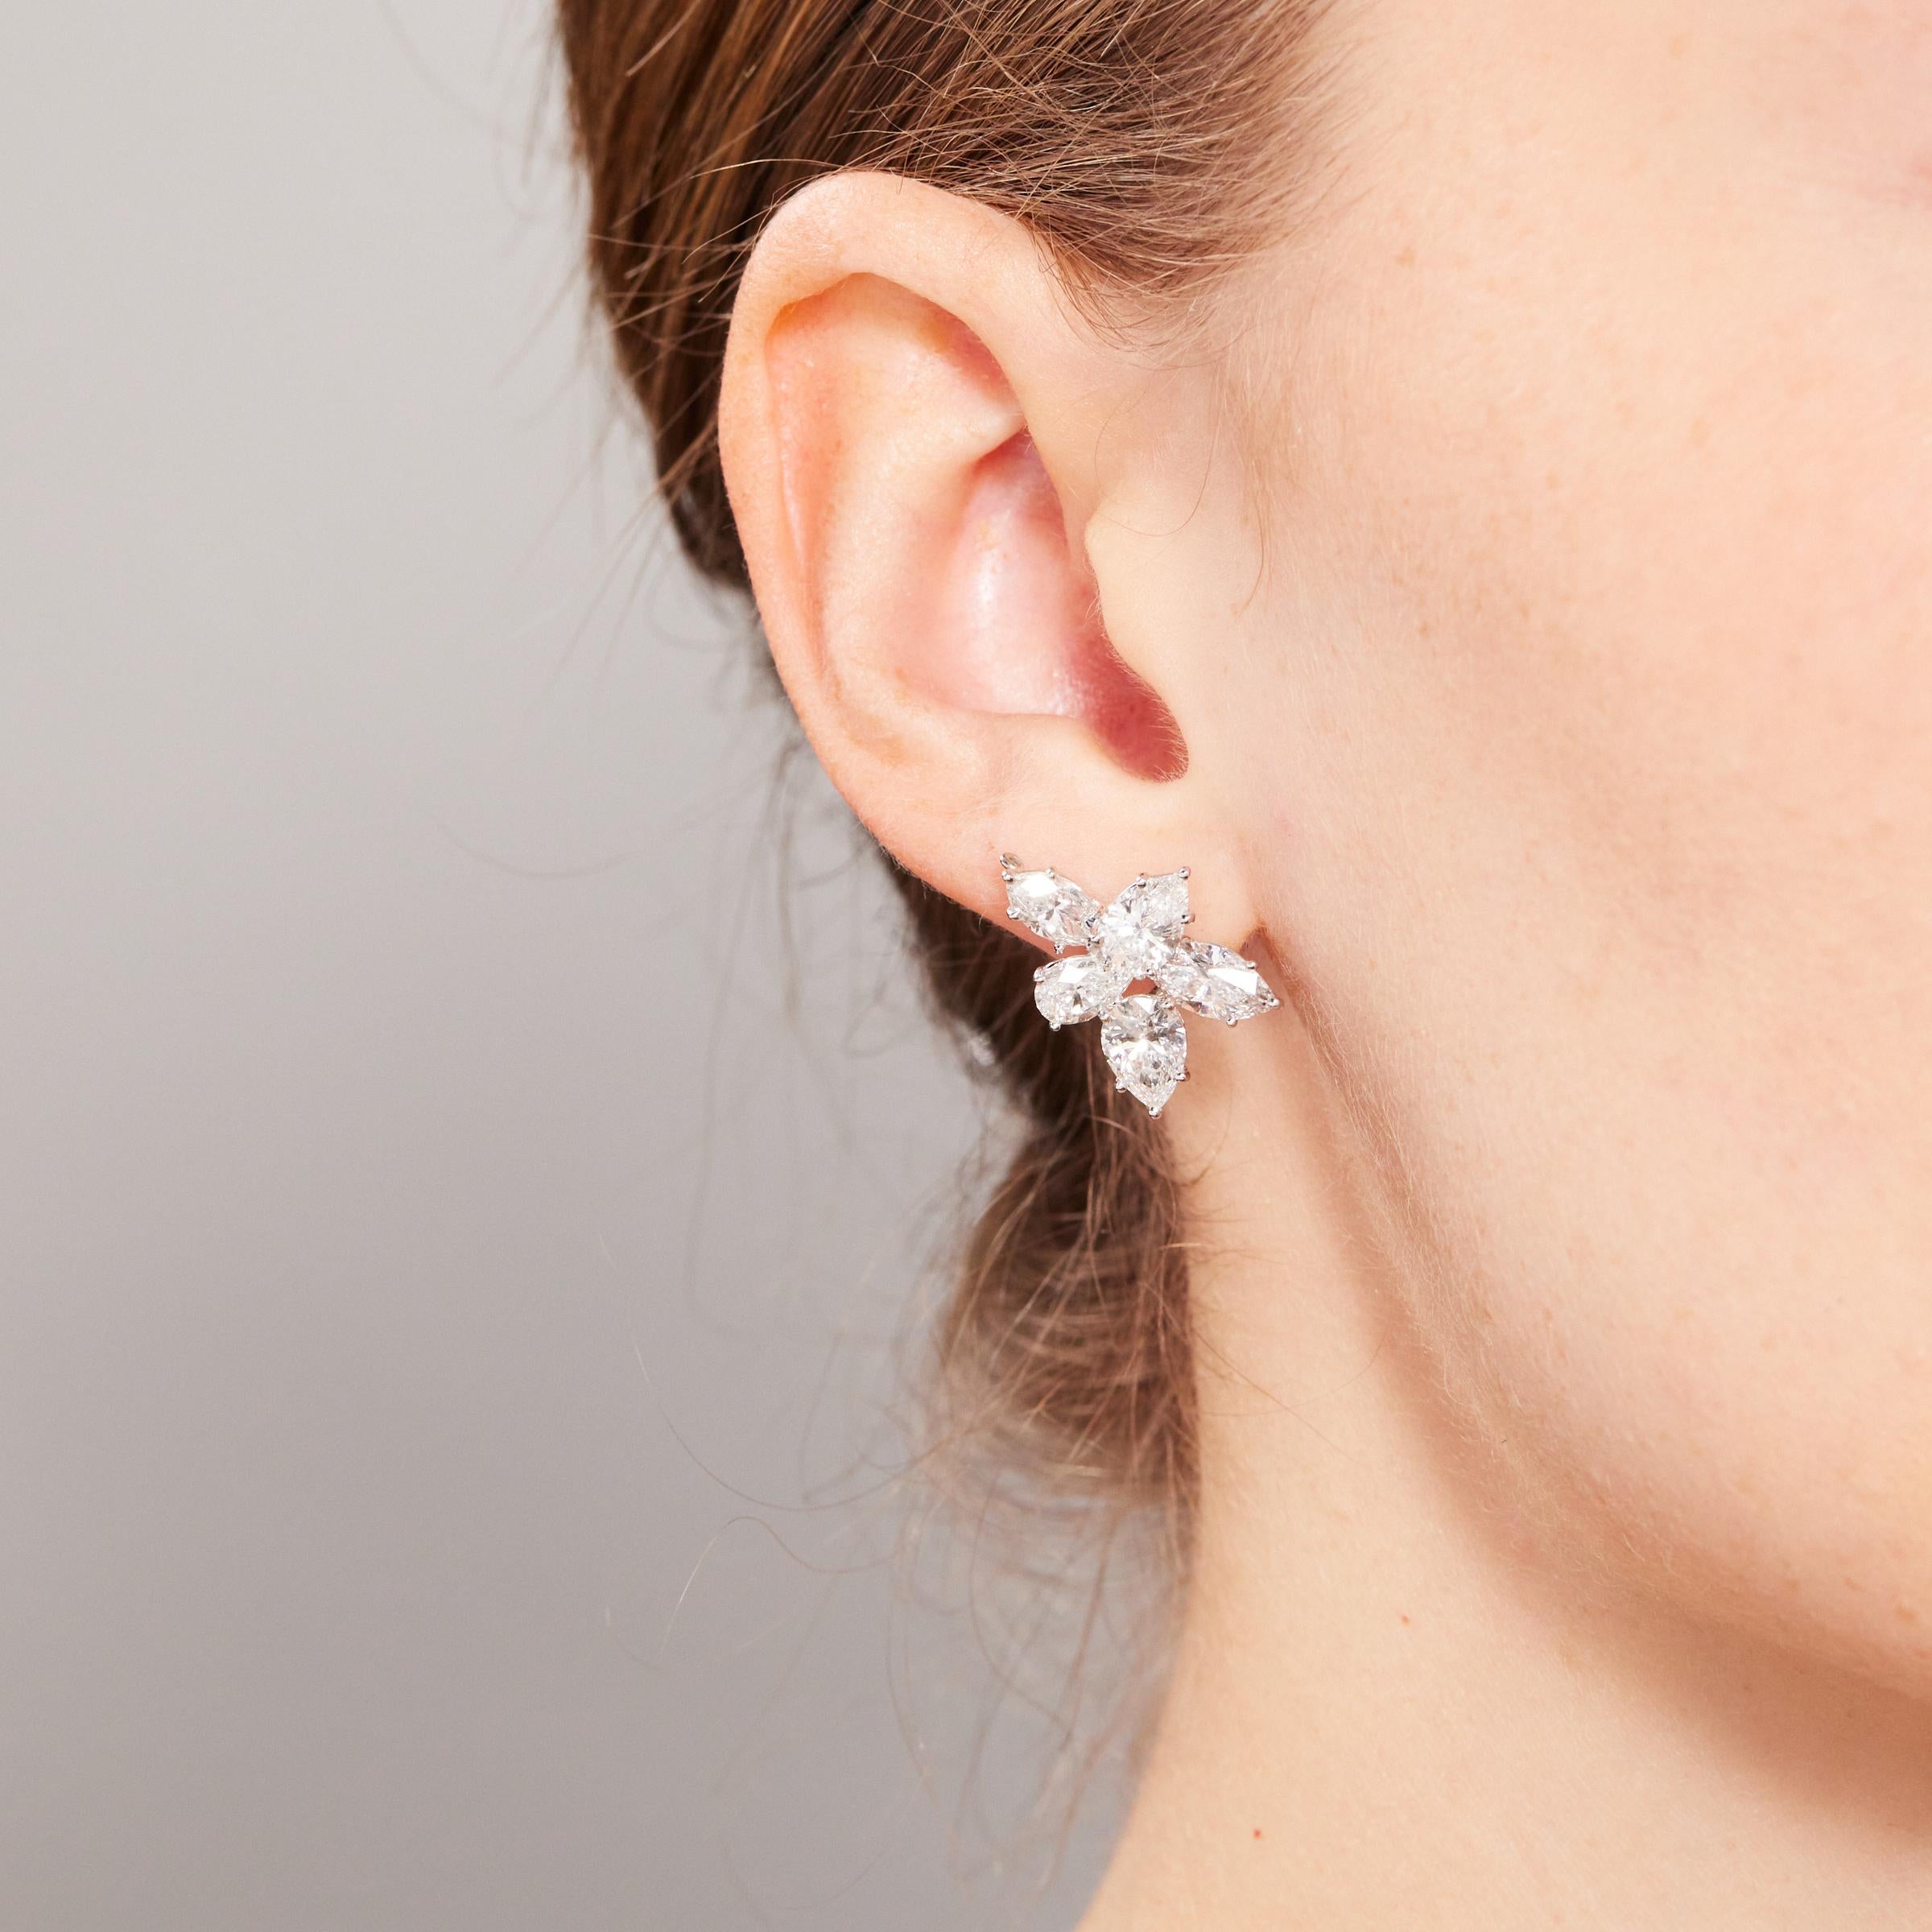 Splendid pair of Harry Winston iconic cluster diamond earrings from 1980s. The earrings showcase an ensemble of 10 glittering diamonds totaling 8 carats and set in platinum with 18 karat gold earring backs. Each earring features 5 diamonds (3 pear